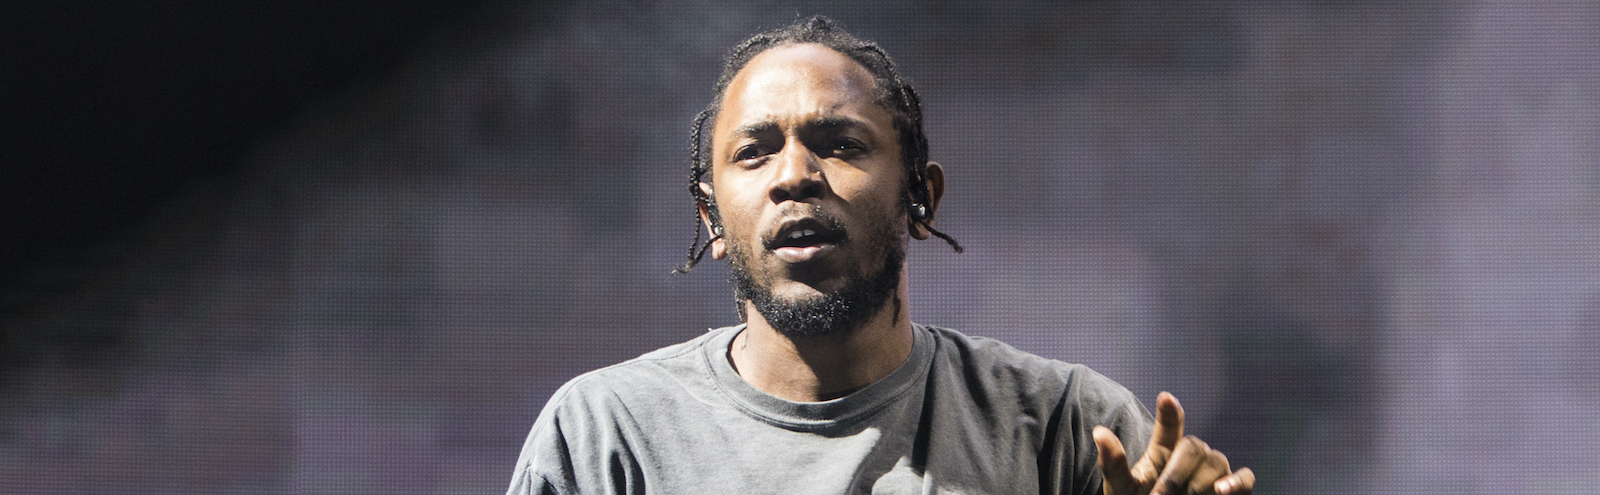 Kendrick Lamar Will Have New Music Next Year, Claims A Danish Festival